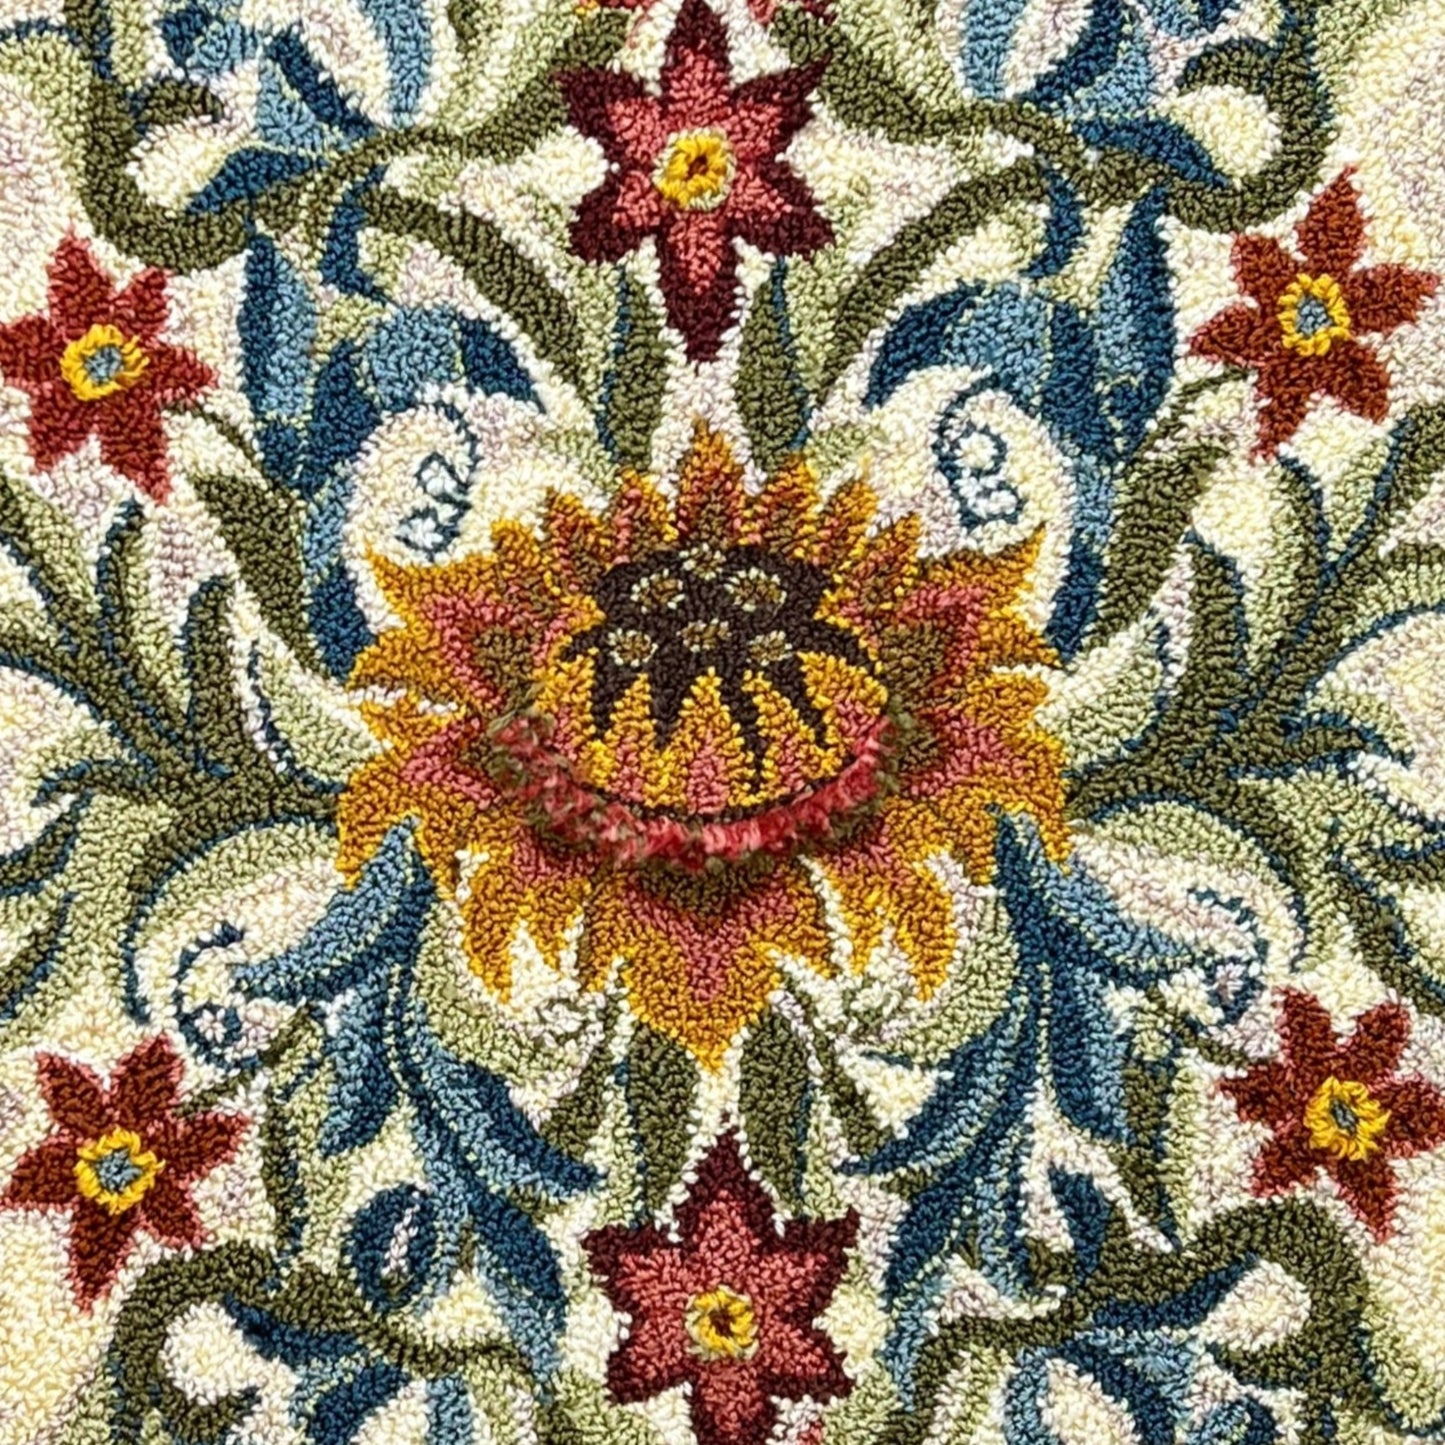 Delight- Paper Rug Hooking or Rug Punch Needle Pattern by Orphaned Wool. This is a timeless floral design inspired by the Arts and Crafts movement. The curved edges create an elegance to the design. This is a paper pattern that is formatted to be enlarged. You can choose what size Delight pattern you wish to create with this paper pattern. Copyright 2022- Kelly Kanyok / Orphaned Wool.